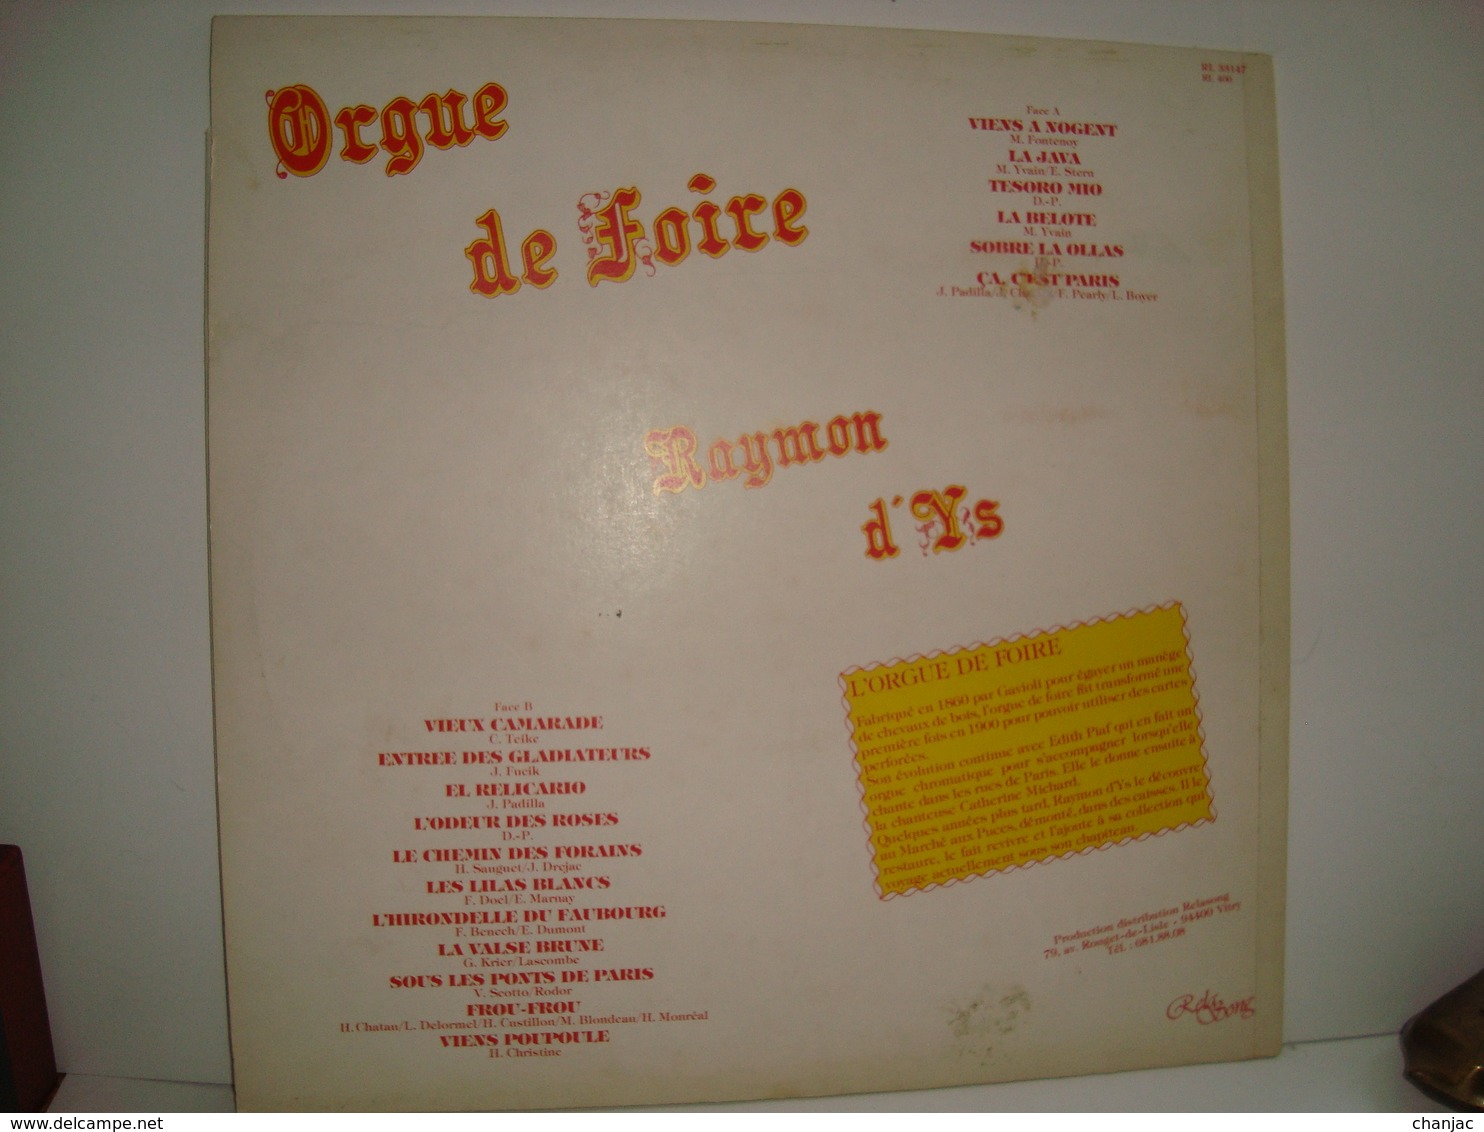 33 Tours: ORGUES DE FOIRE - RAYMON D'YS - Reda Song 33147 (rare) - Other - French Music